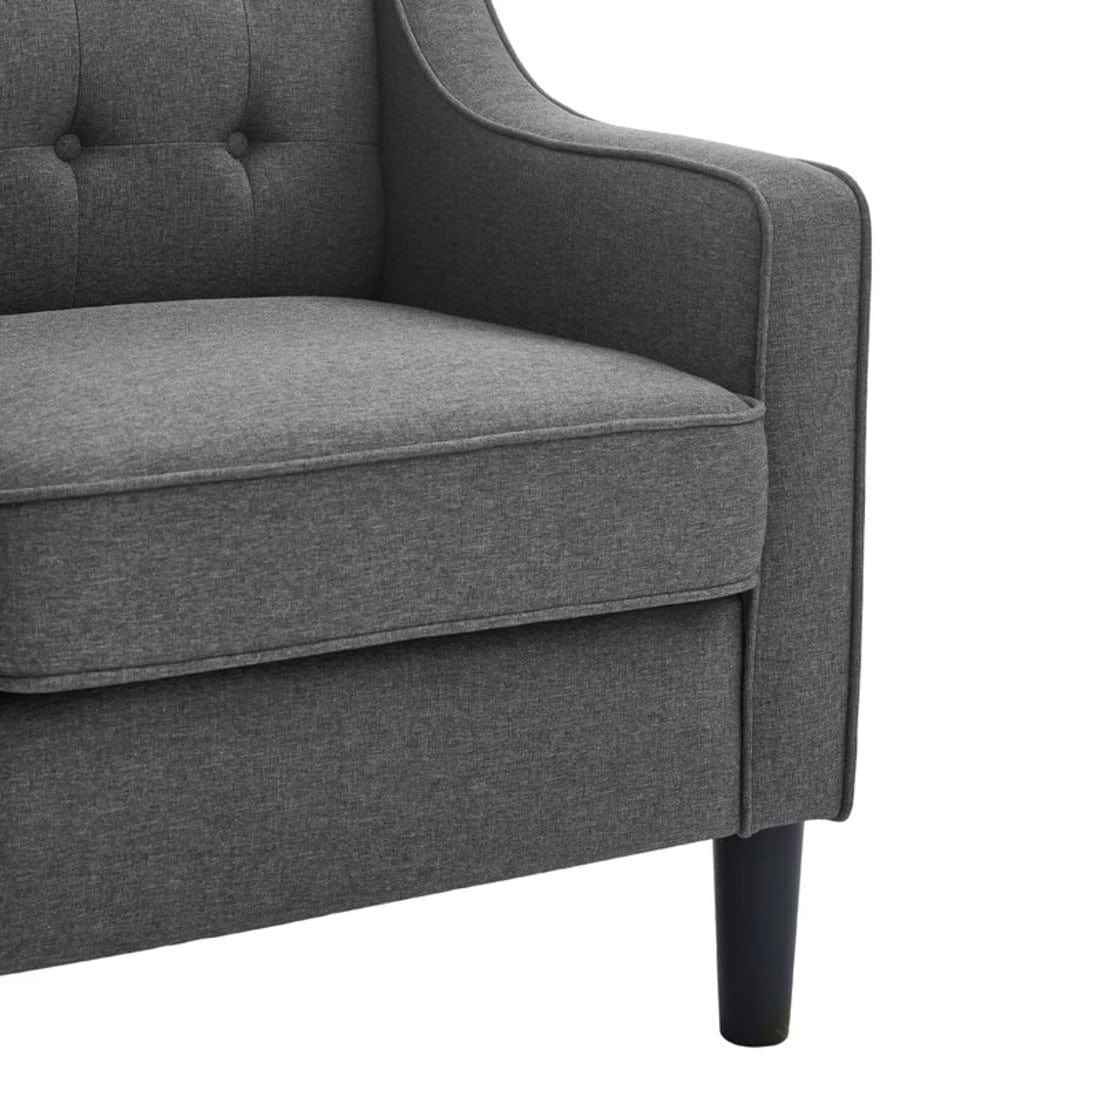 Pearson accent chair with ottoman